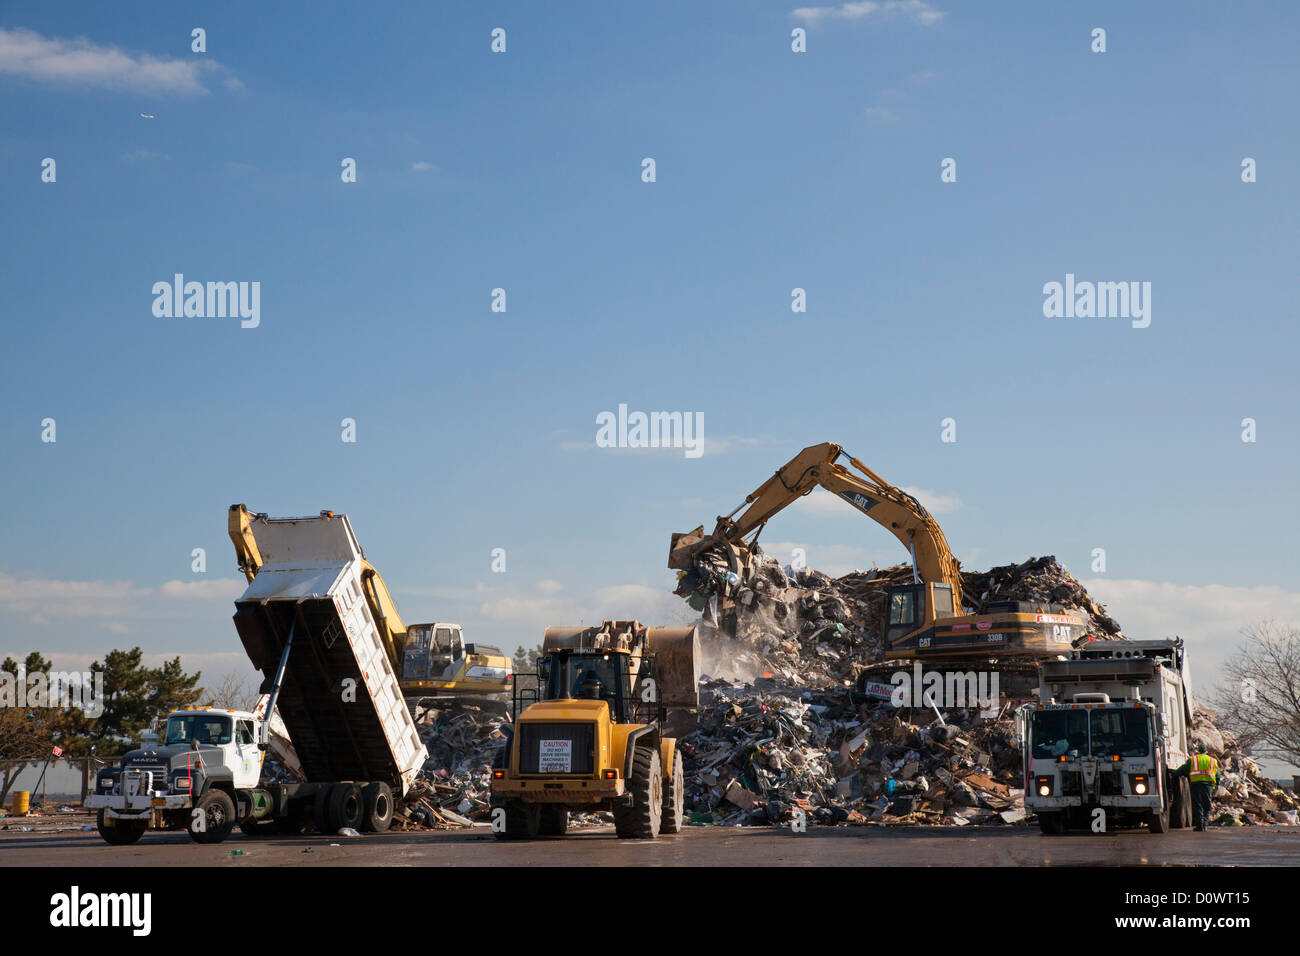 New York, New York - Workers pile debris from Hurricane Sandy in a parking lot next to the beach on Staten Island. Stock Photo